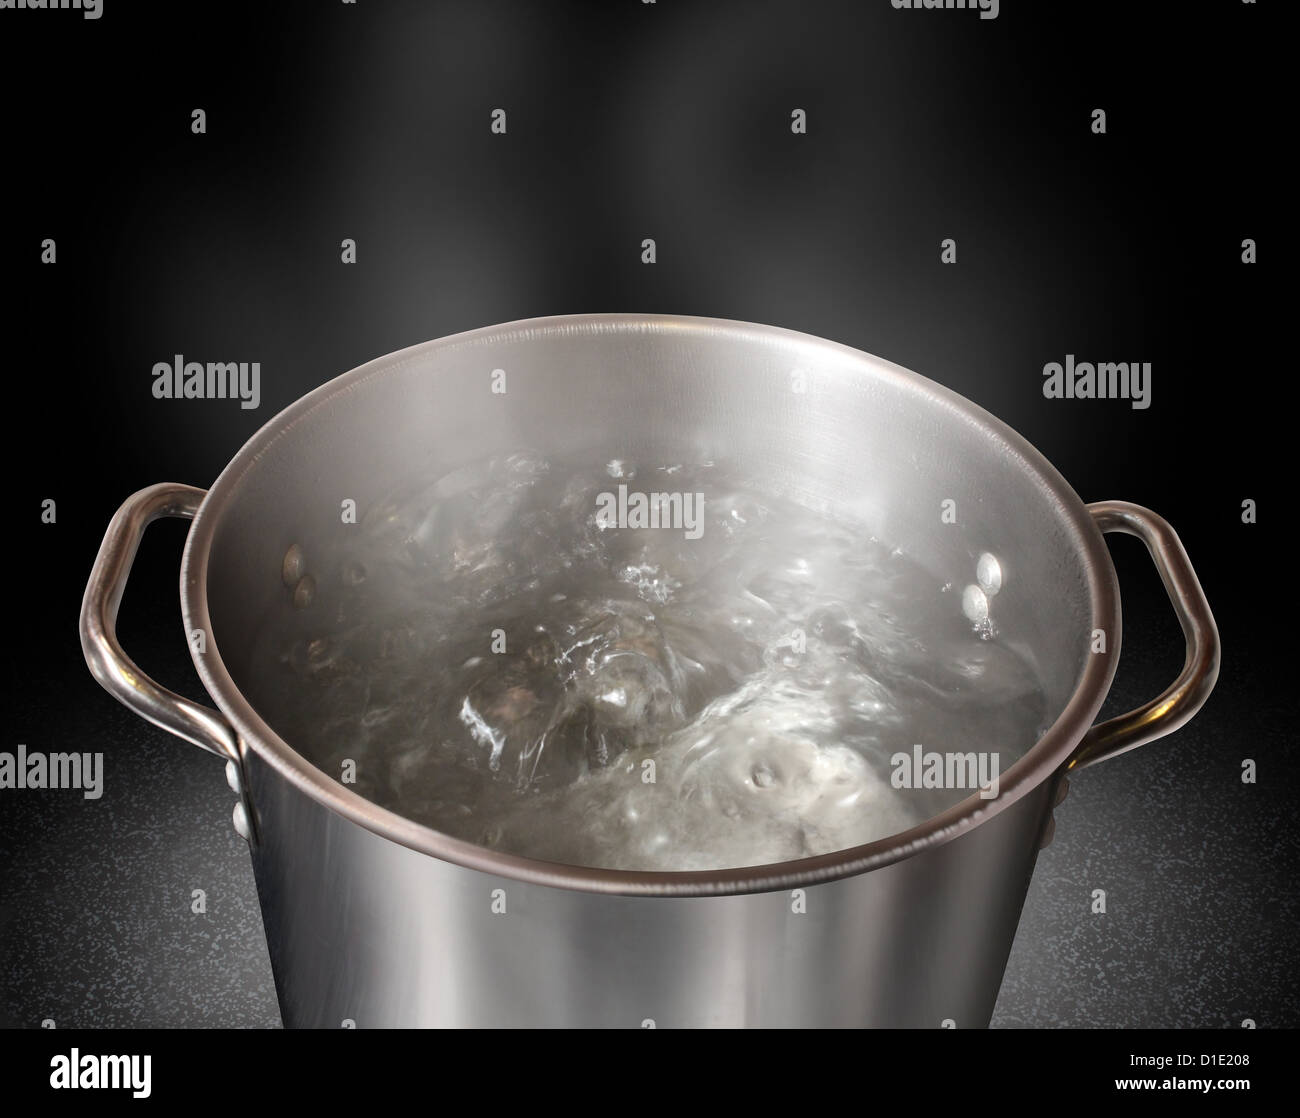 https://c8.alamy.com/comp/D1E208/boiling-water-in-a-kitchen-pot-as-a-symbol-of-cooking-or-food-preparation-D1E208.jpg